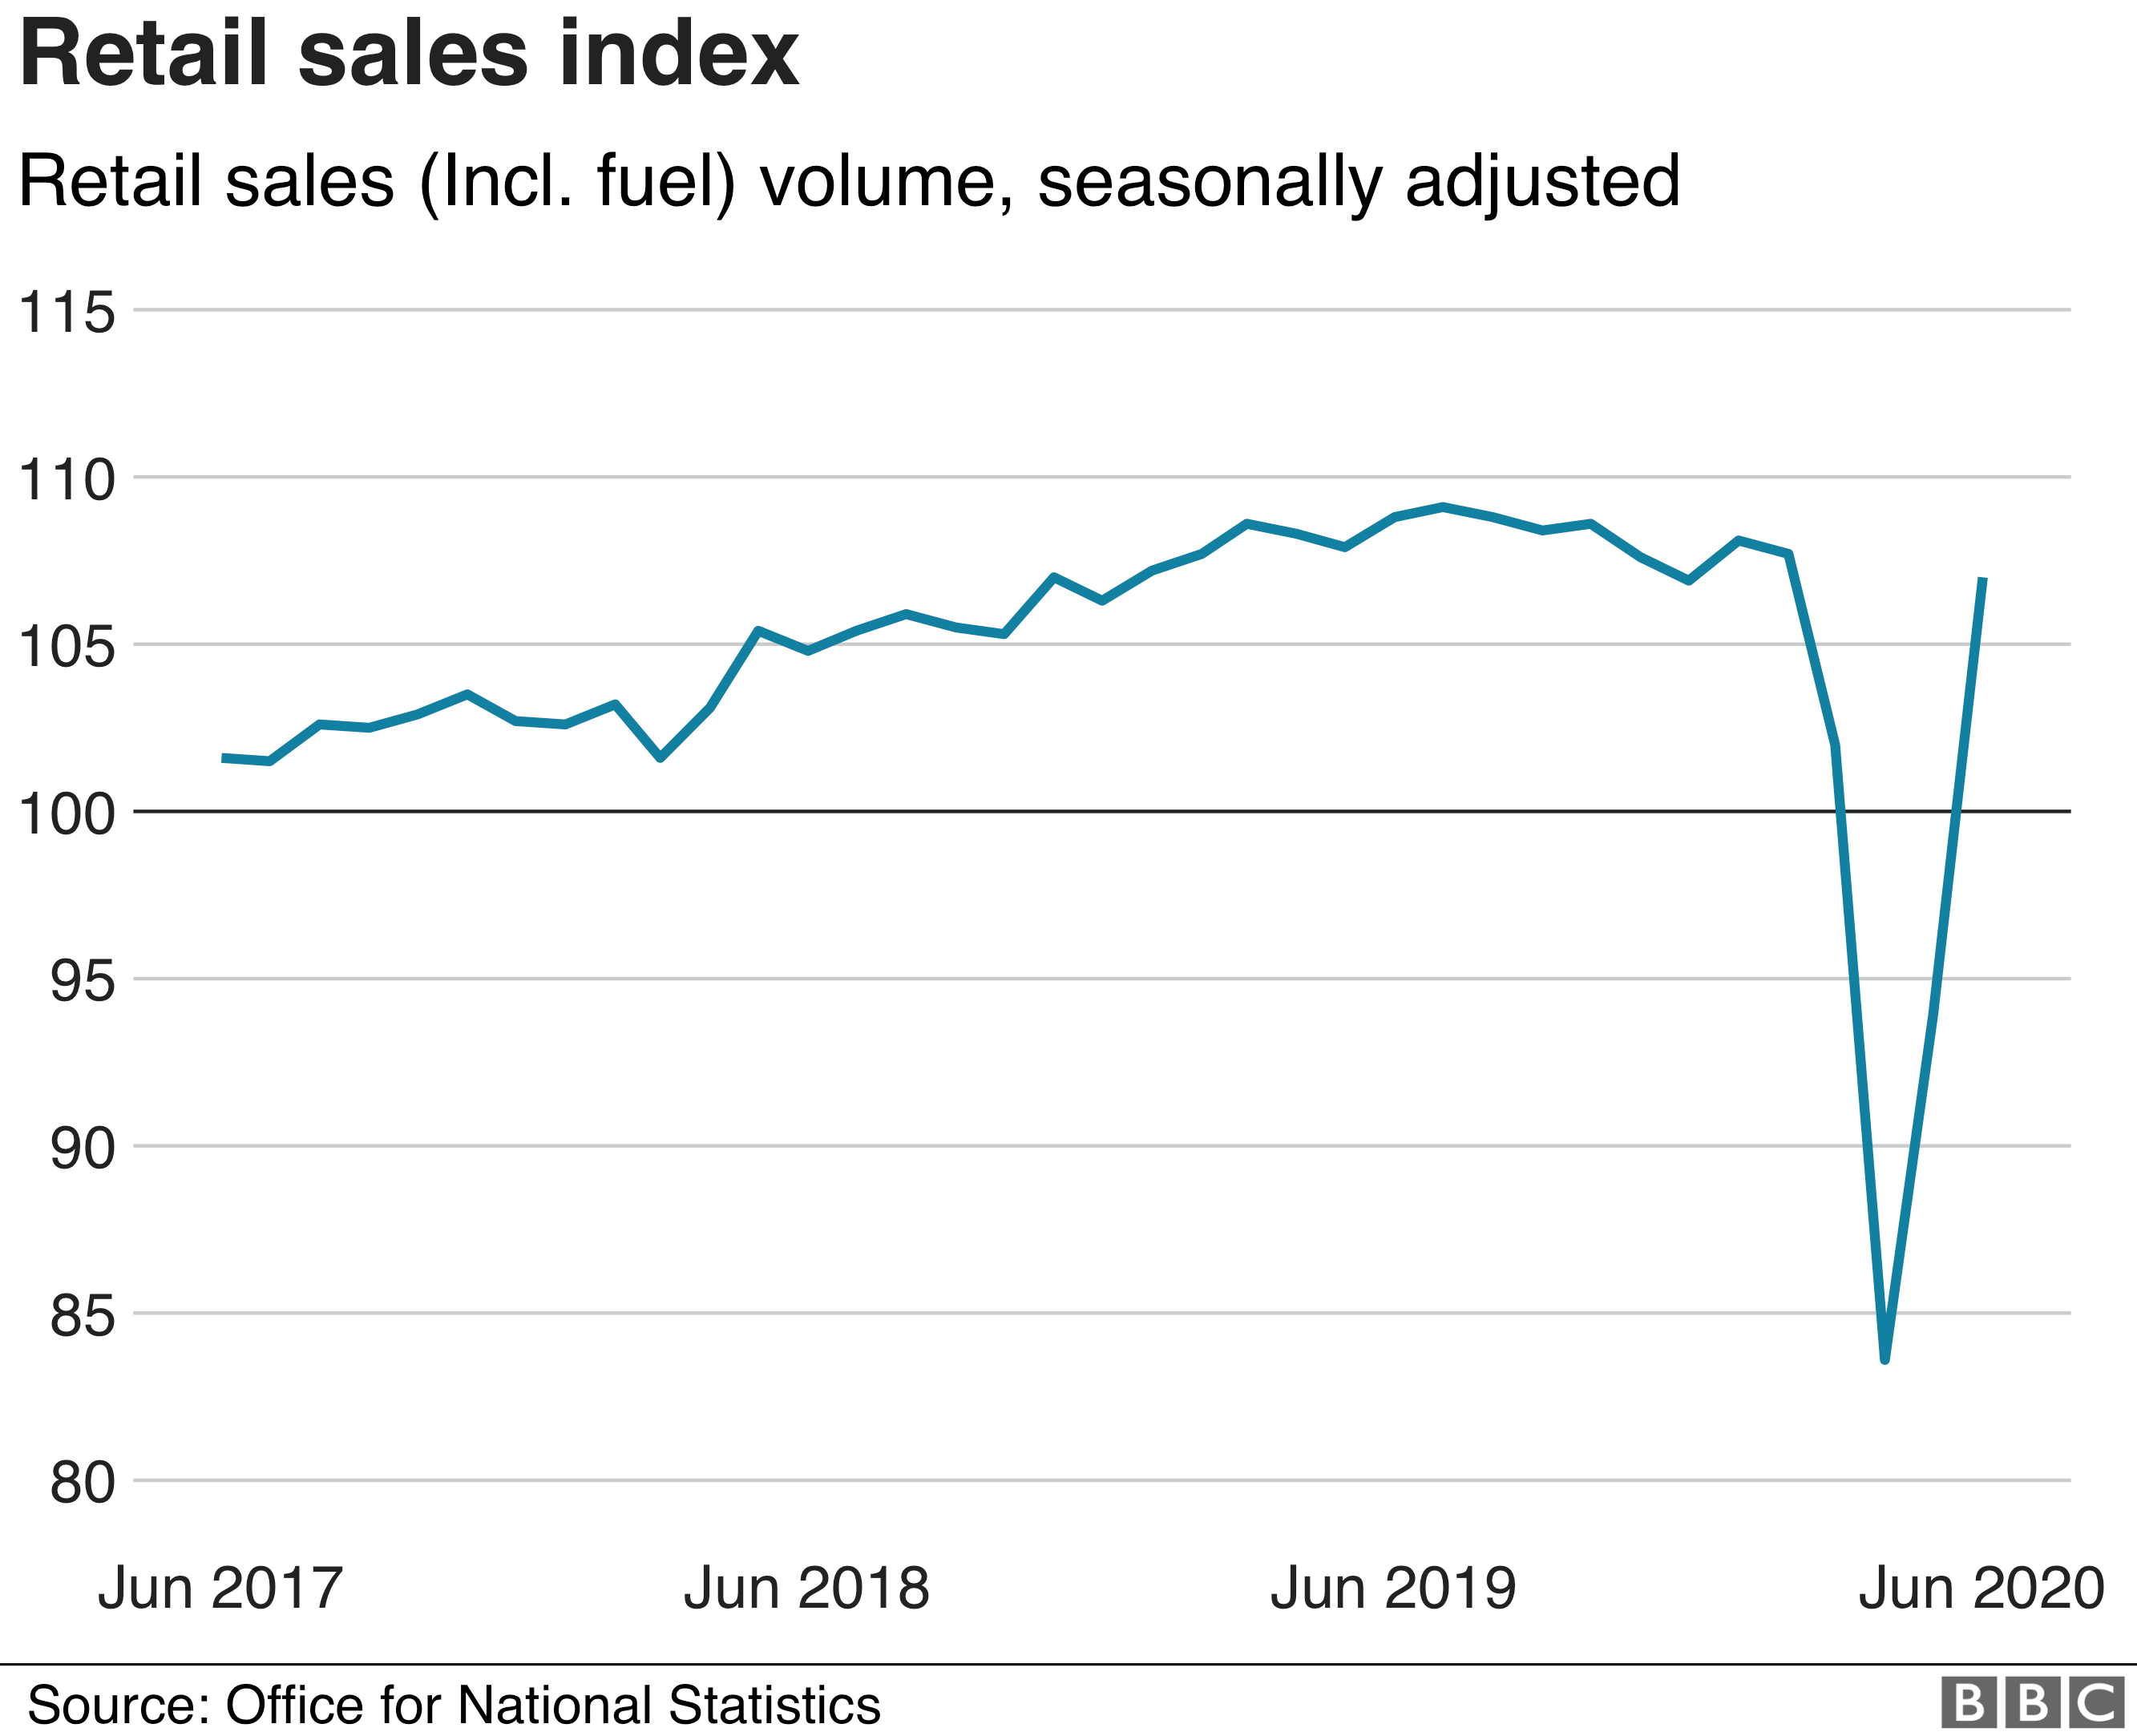 Retail sales from June 2017